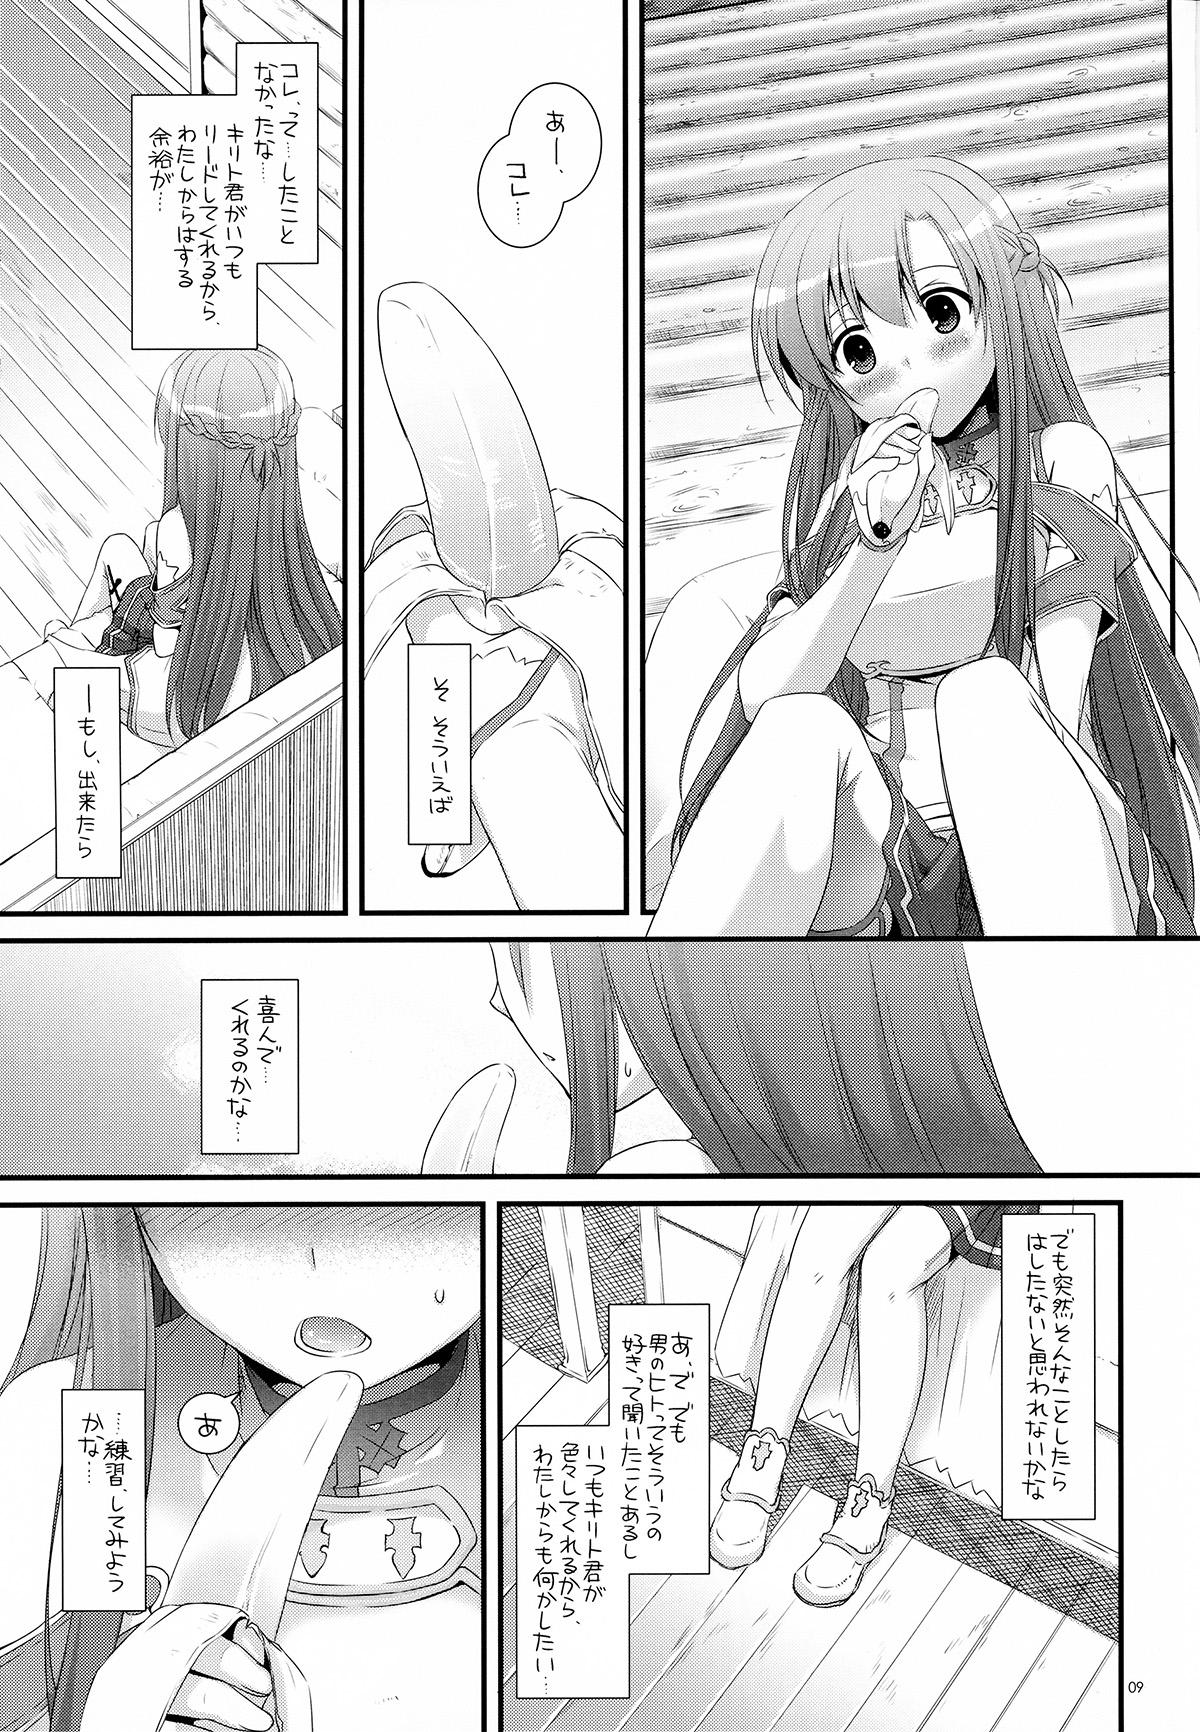 Gay Blondhair D.L.action 71 - Sword art online Dyke - Page 9